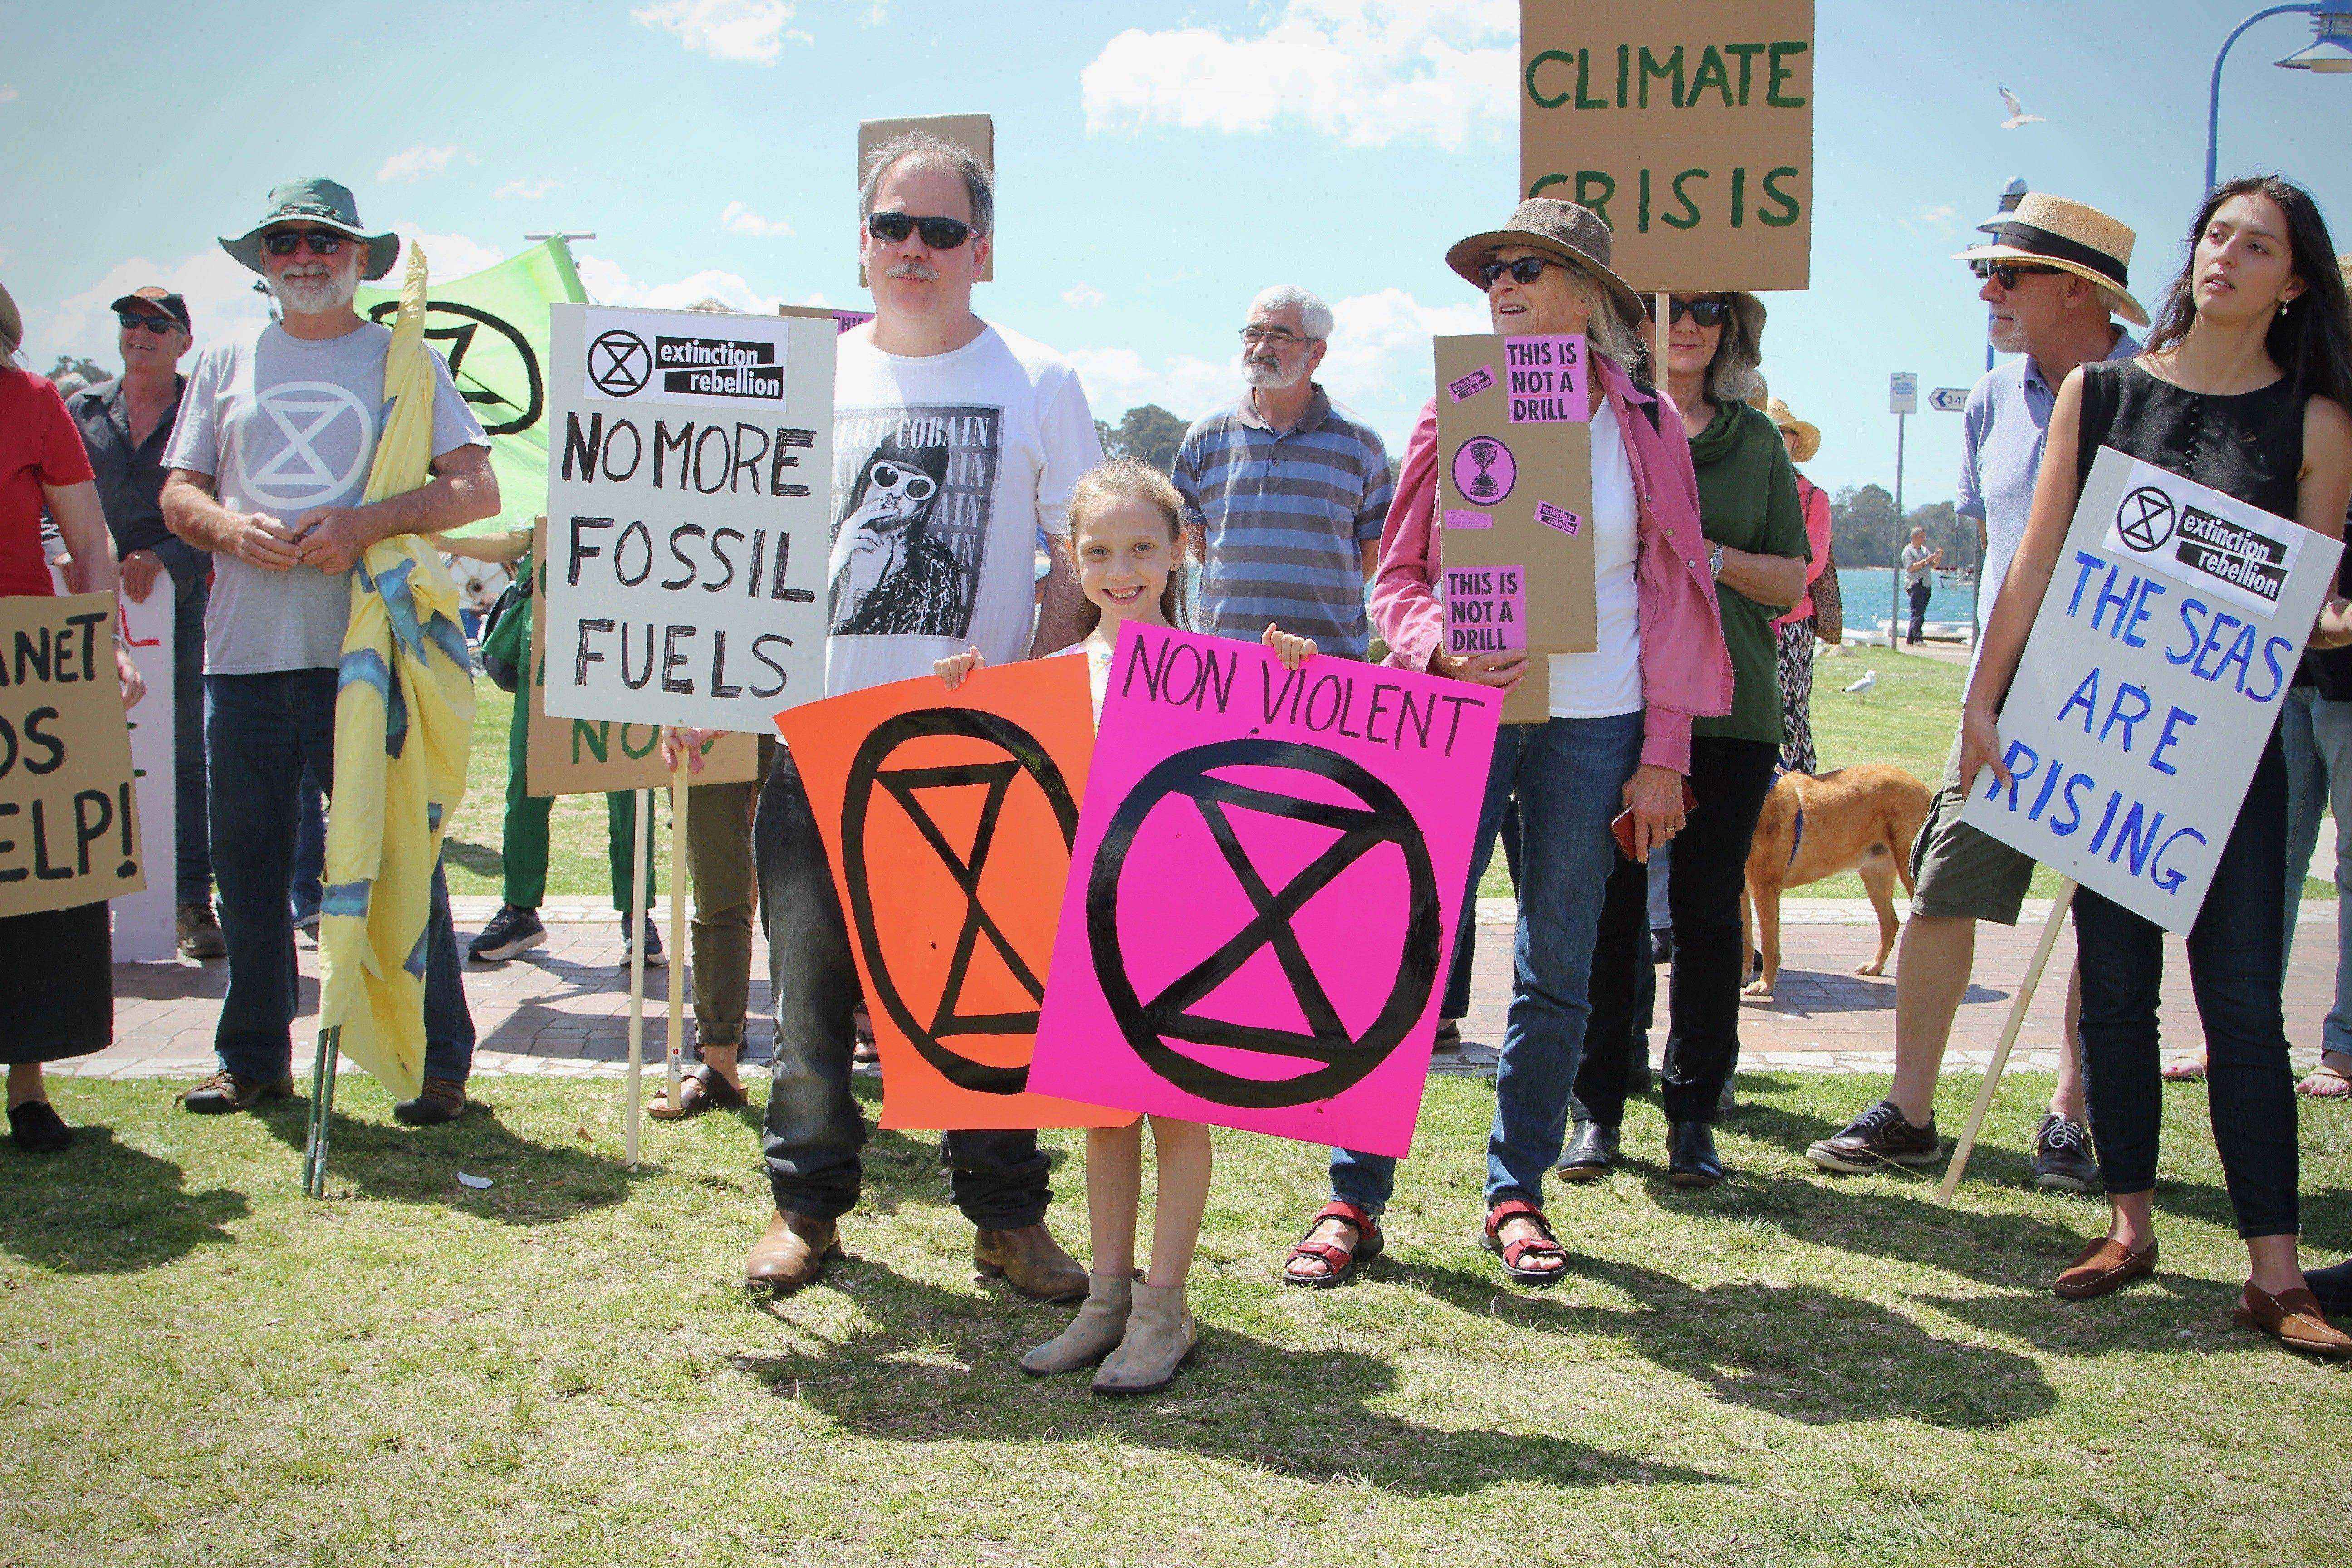 ‘The seas are rising and so are we!’ - Extinction Rebellion comes to Batemans Bay